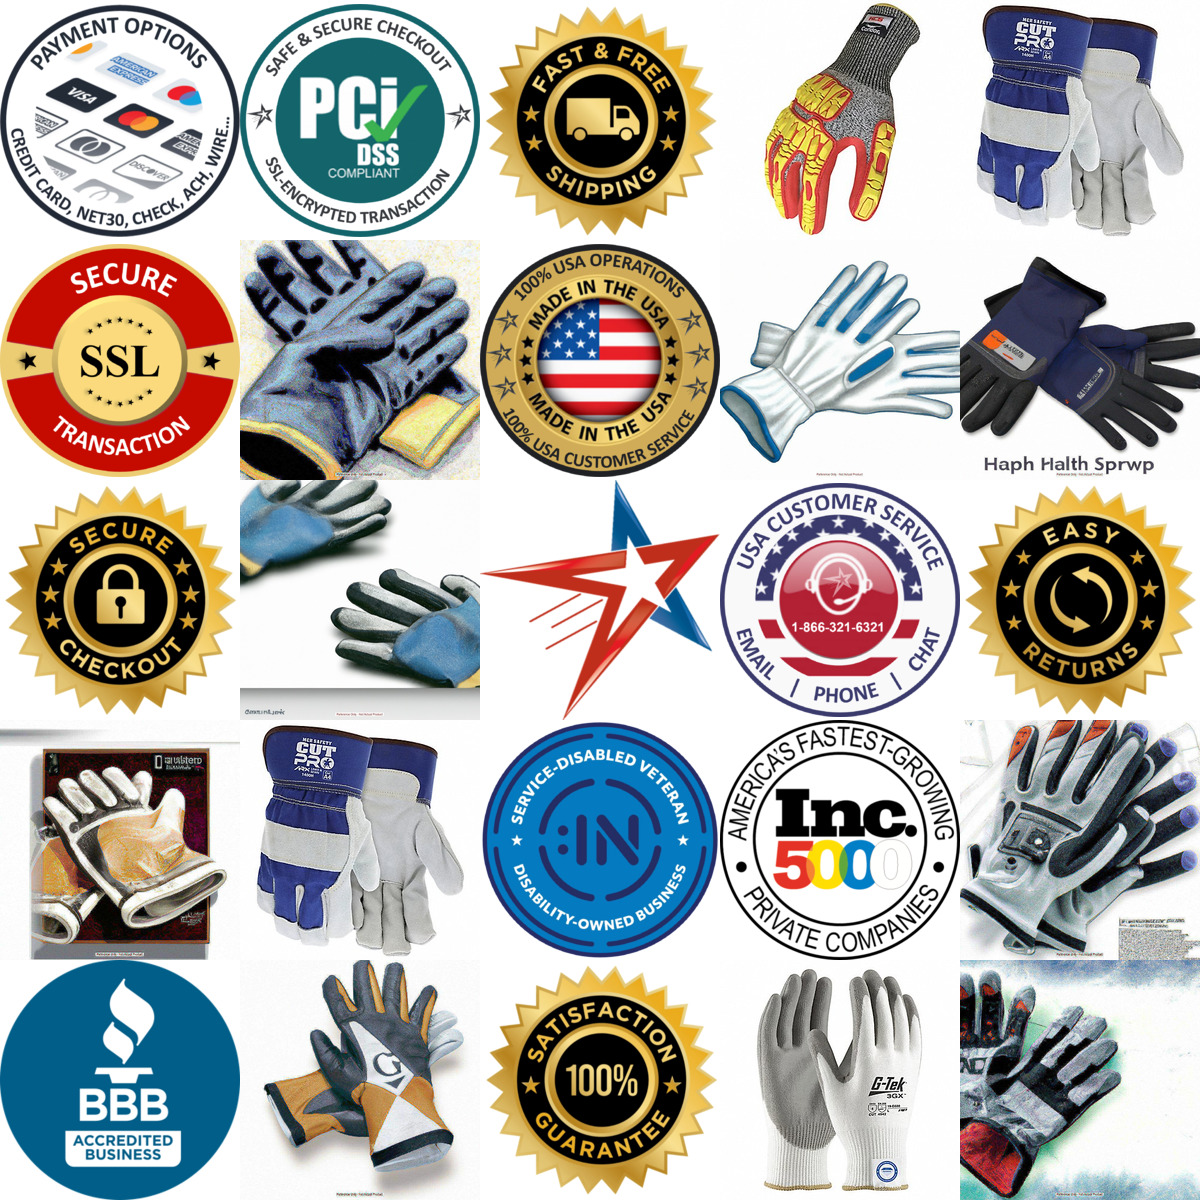 A selection of Cut Resistant Gloves products on GoVets